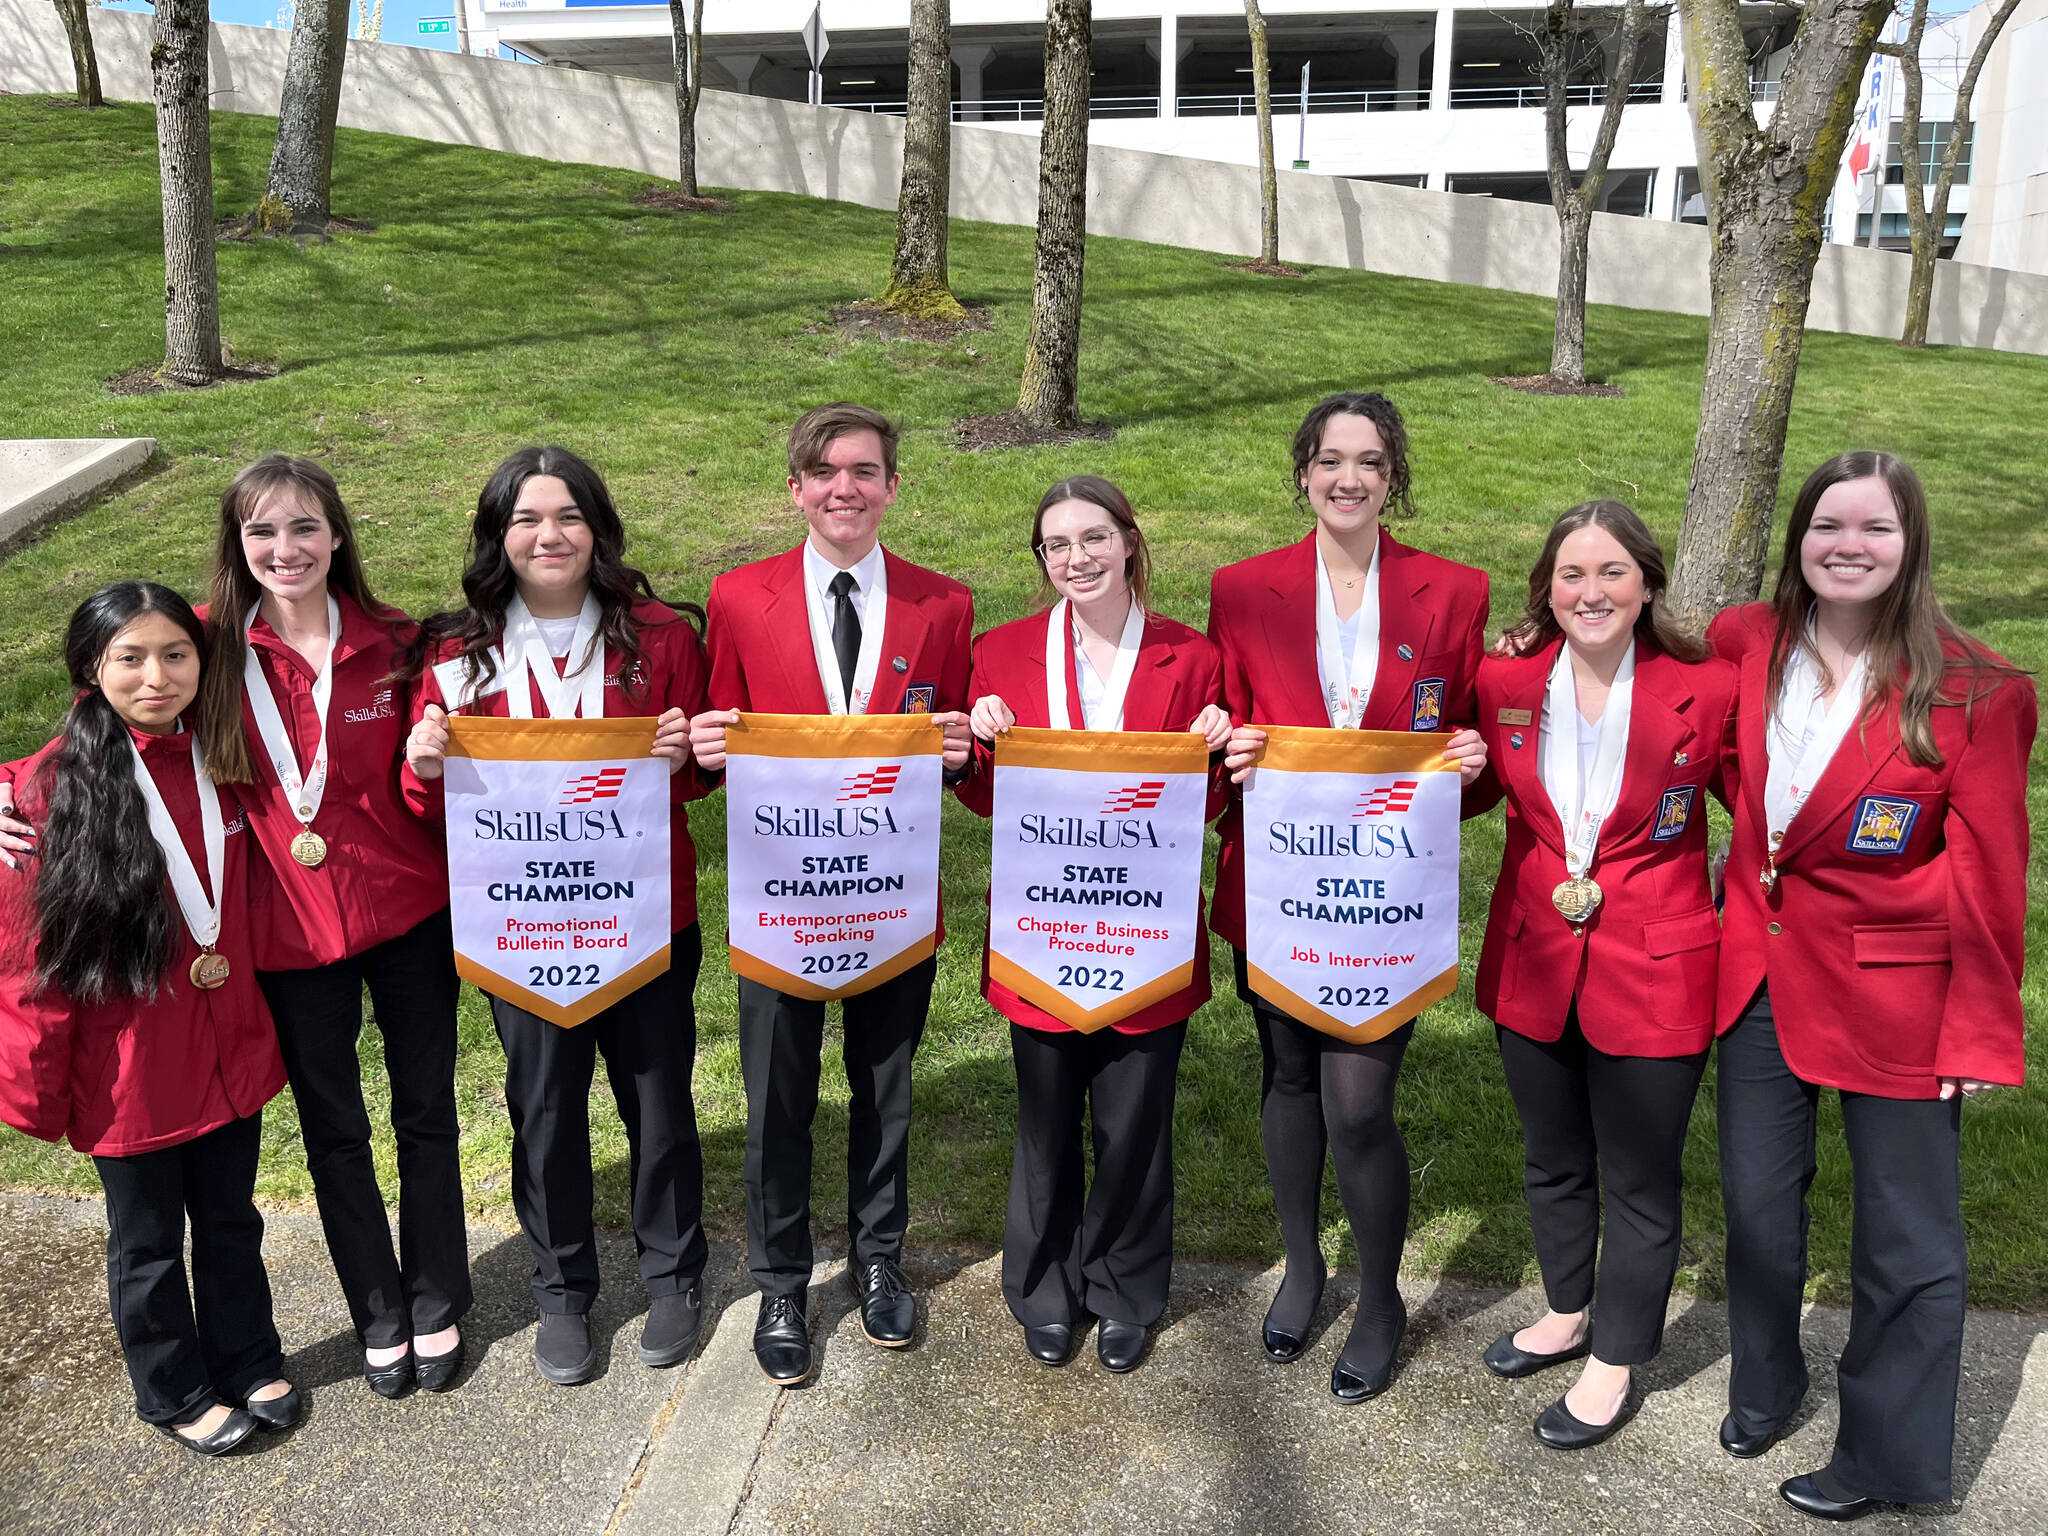 (Photo Courtesy of Elma High School) Students that won in their state competitions for SkillsUSA will compete at Nationals in Atlanta. From Left: Nancy Ramirez, Emma Spalding, Payton Simmons, Samuel Gillis, Delayne Hanson, Torrey Thompson, Grace Smith, Kara Heley.